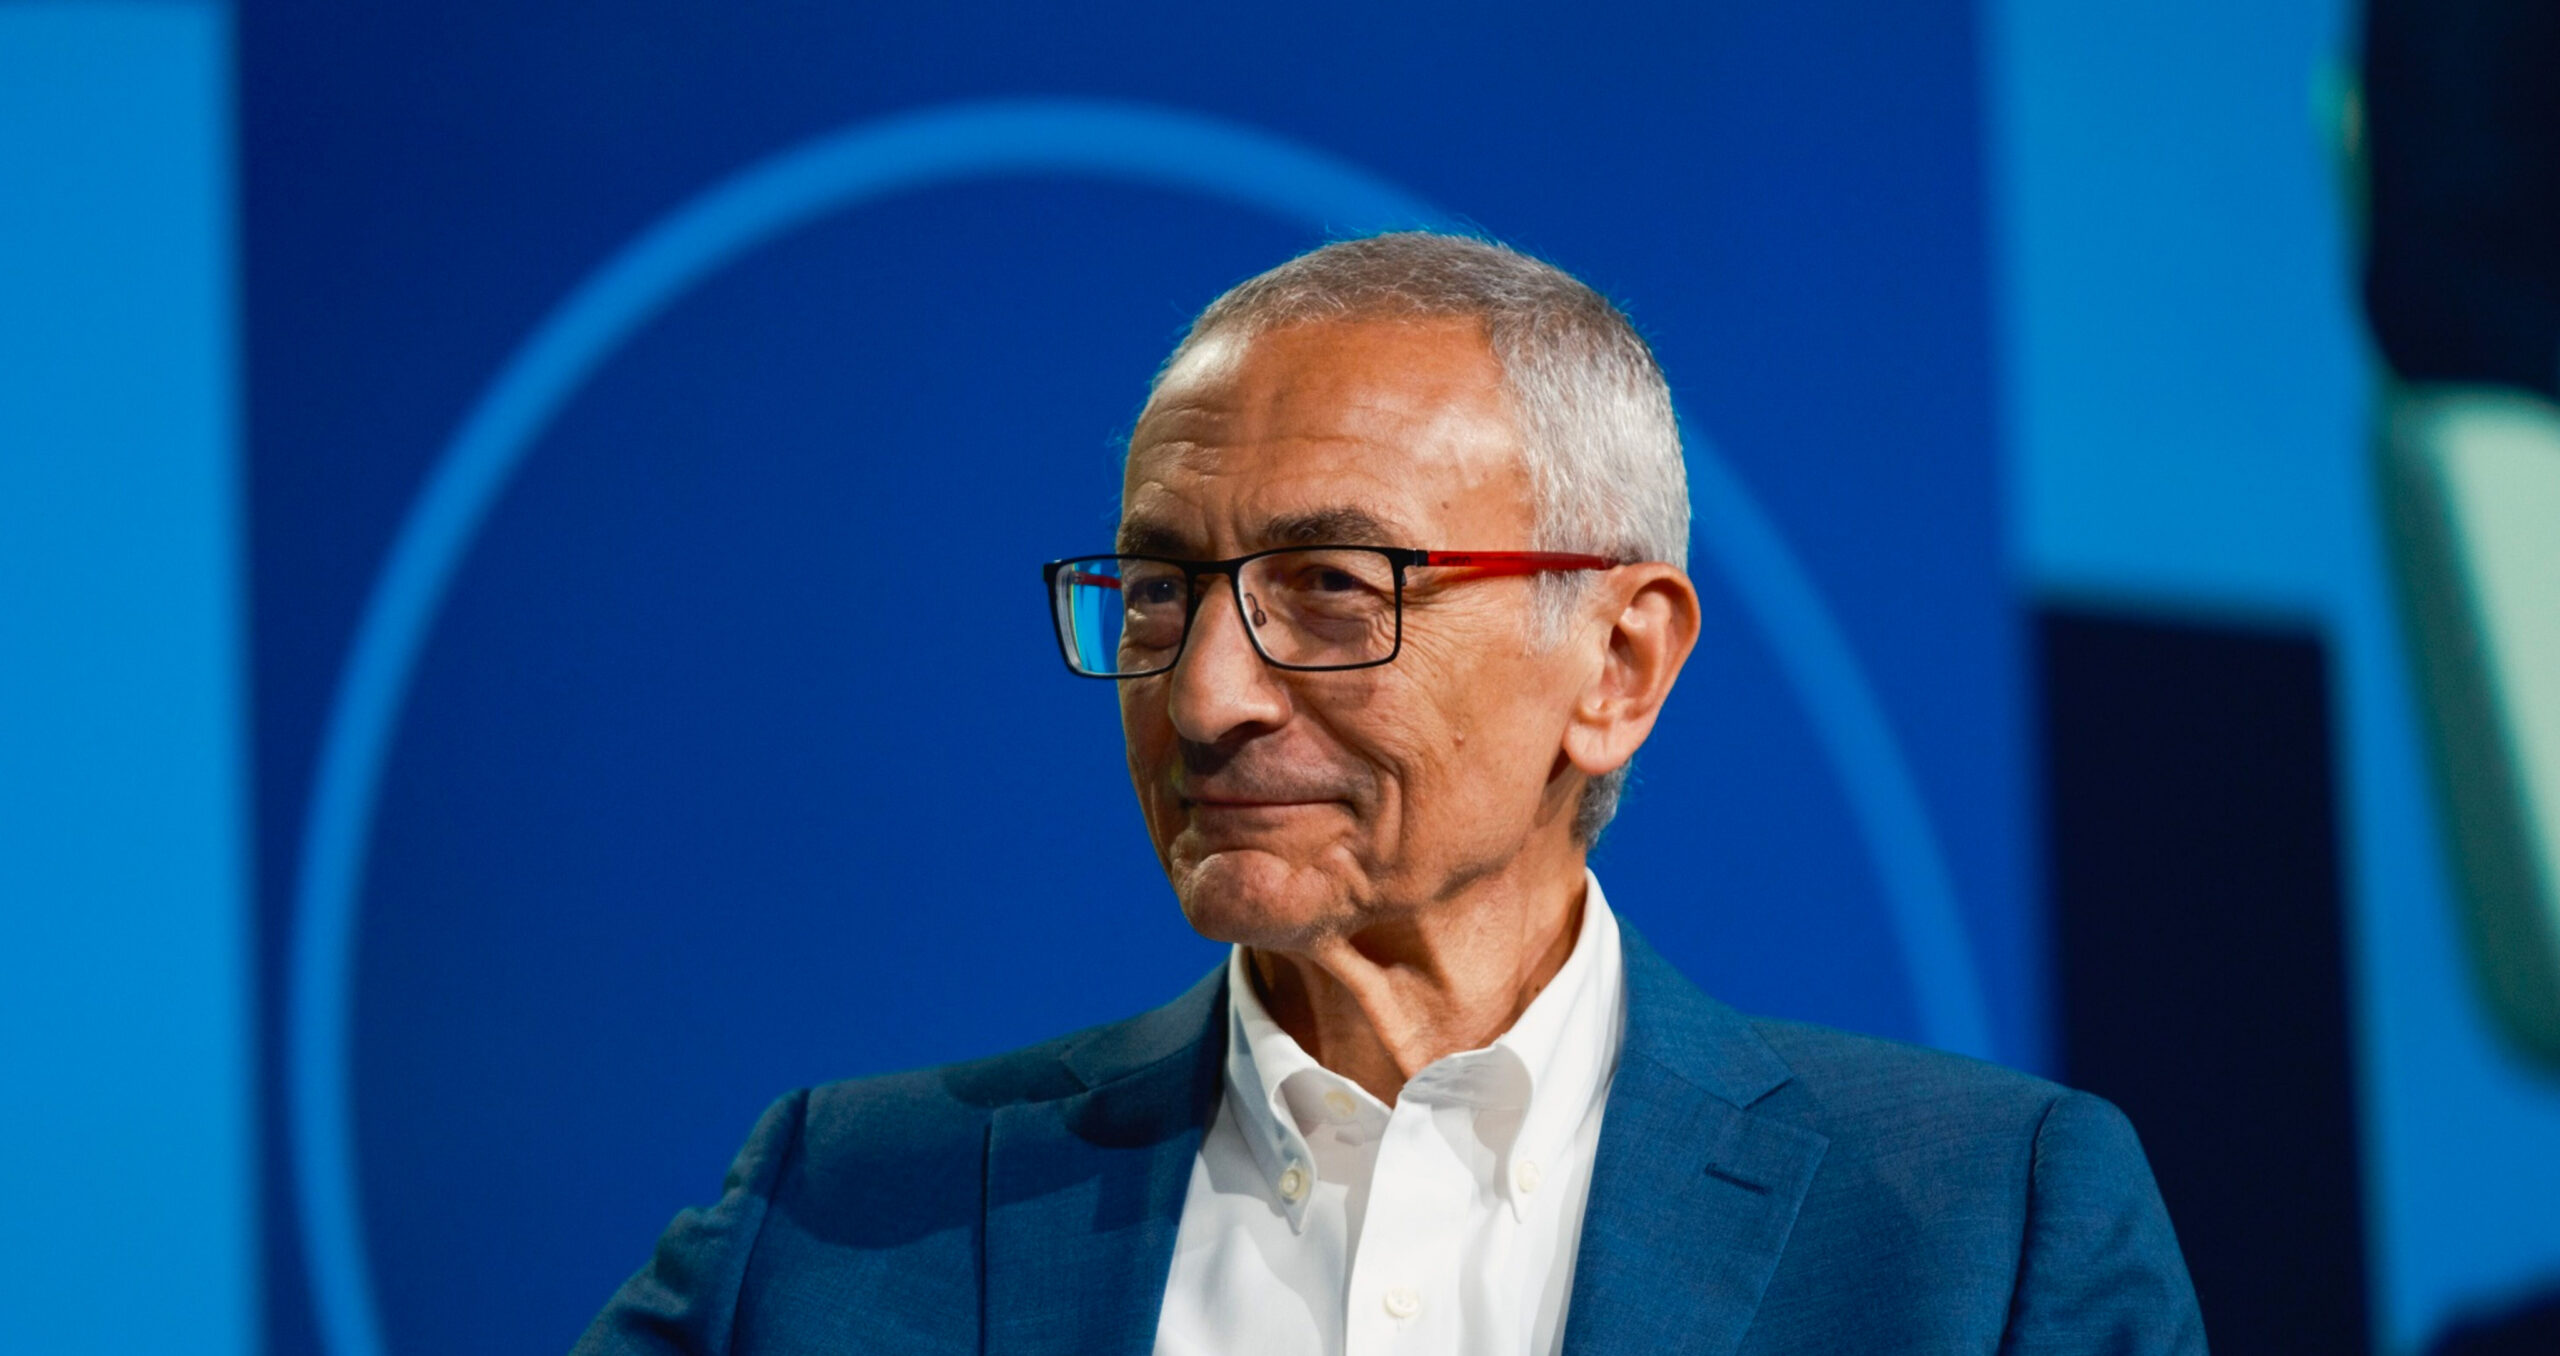 John Podesta: John Kerry’s successor as US climate envoy has been described as being “laser-focused on making sure that the clean energy transition works for American workers” (Photo: Jordan Vonderhaar/Bloomberg) 